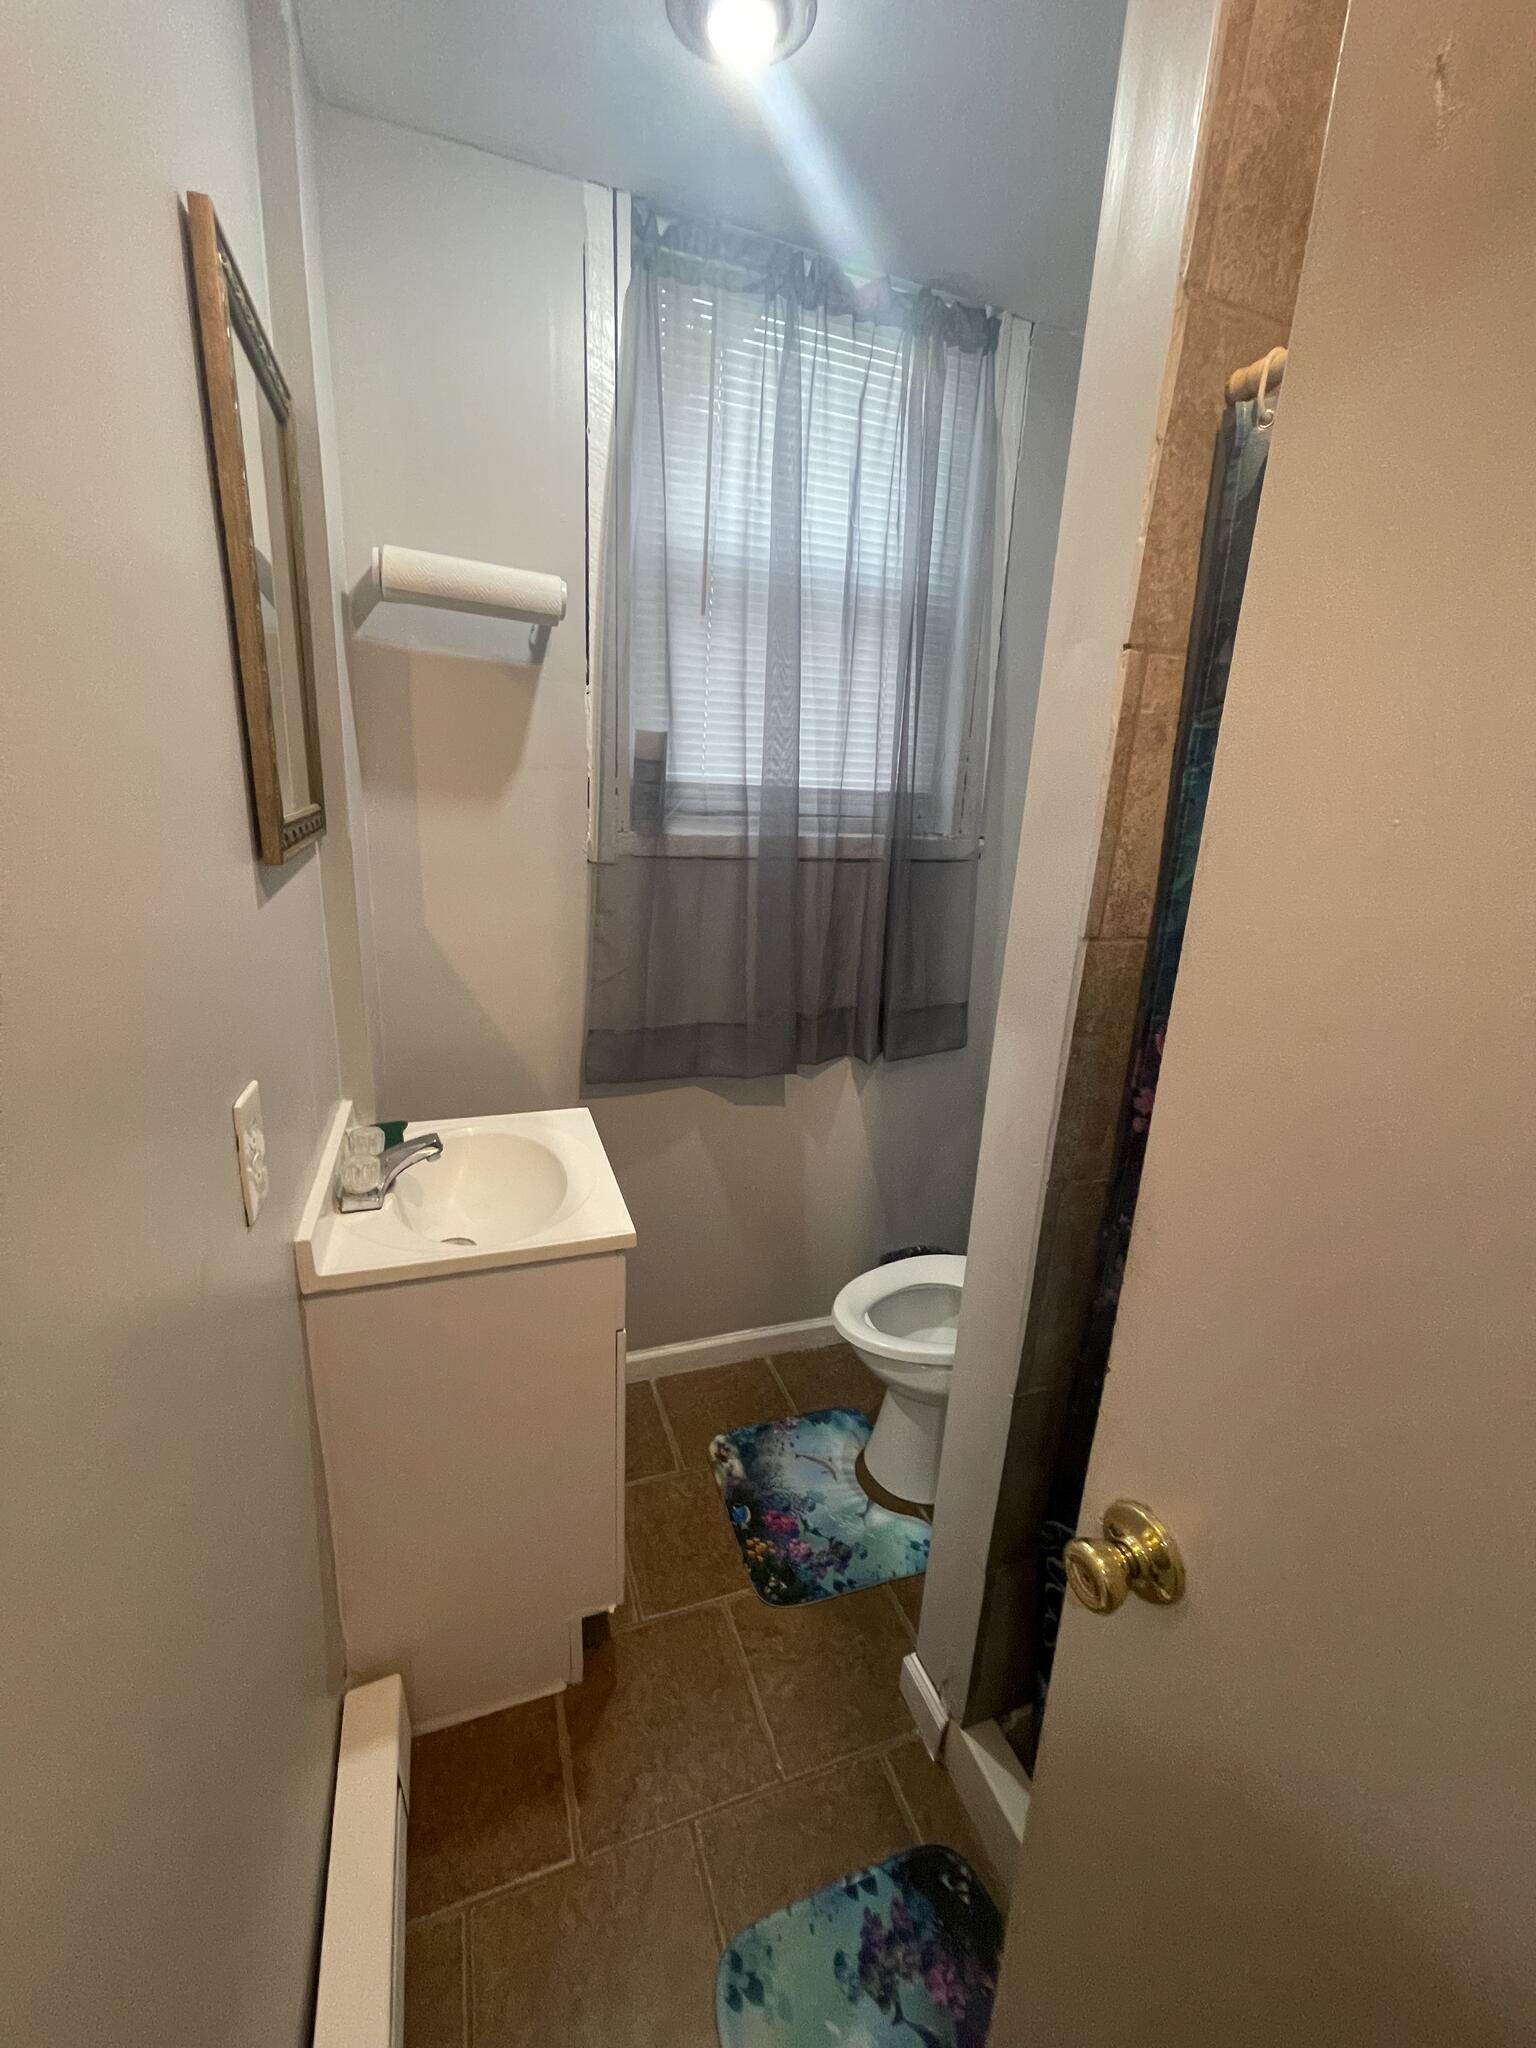 Private room for rent for $600 in Philadelphia, PA | For Sale & Free ...